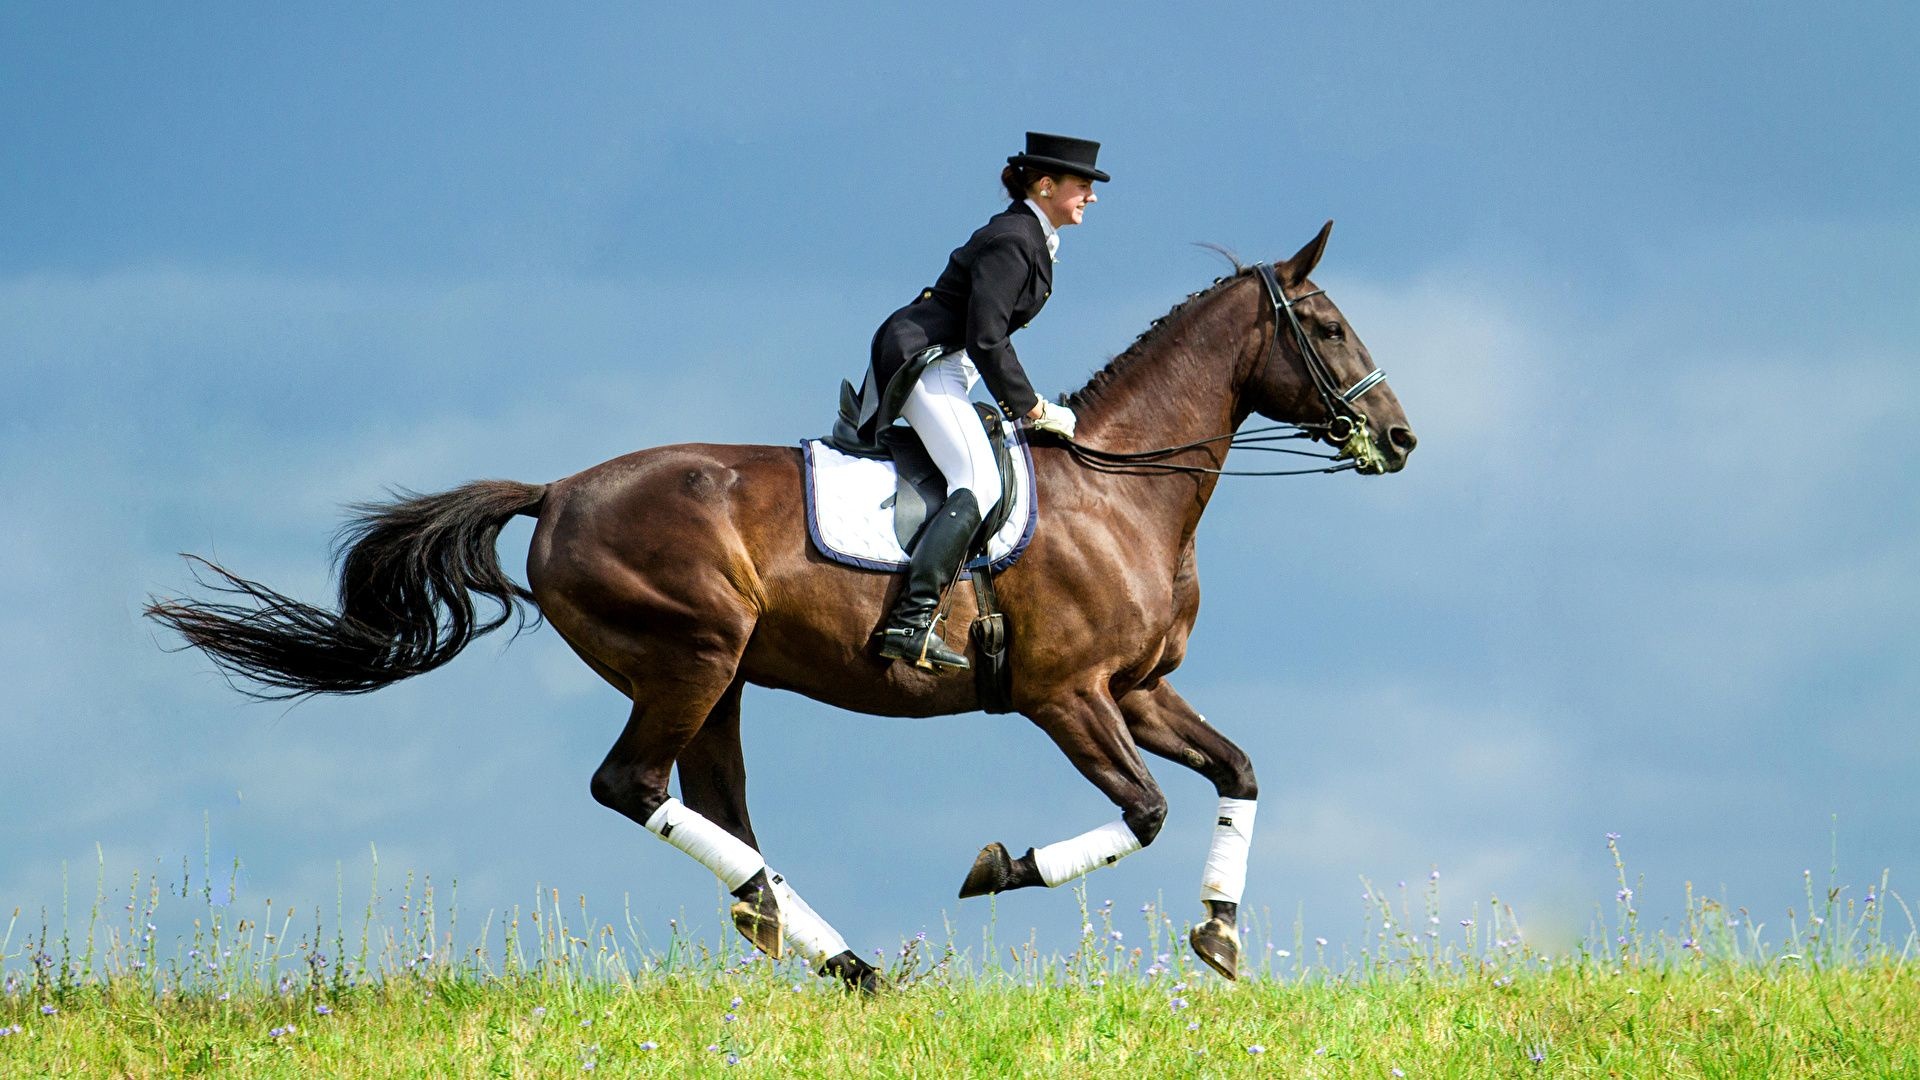 Equitation: Endurance riding, A discipline based on controlled long-distance races. 1920x1080 Full HD Wallpaper.